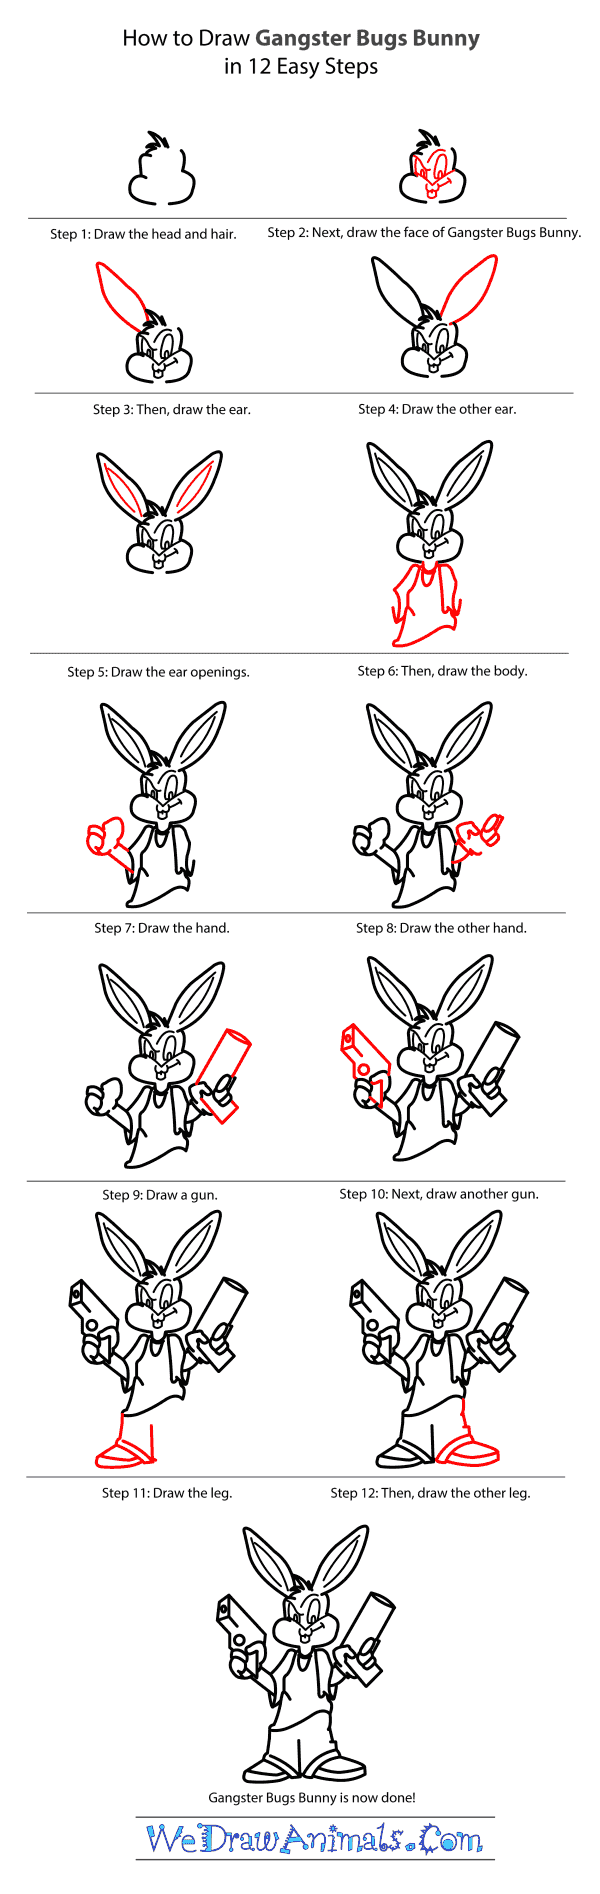 How to Draw Gangster Bugs Bunny From Looney Tunes - Step-by-Step Tutorial